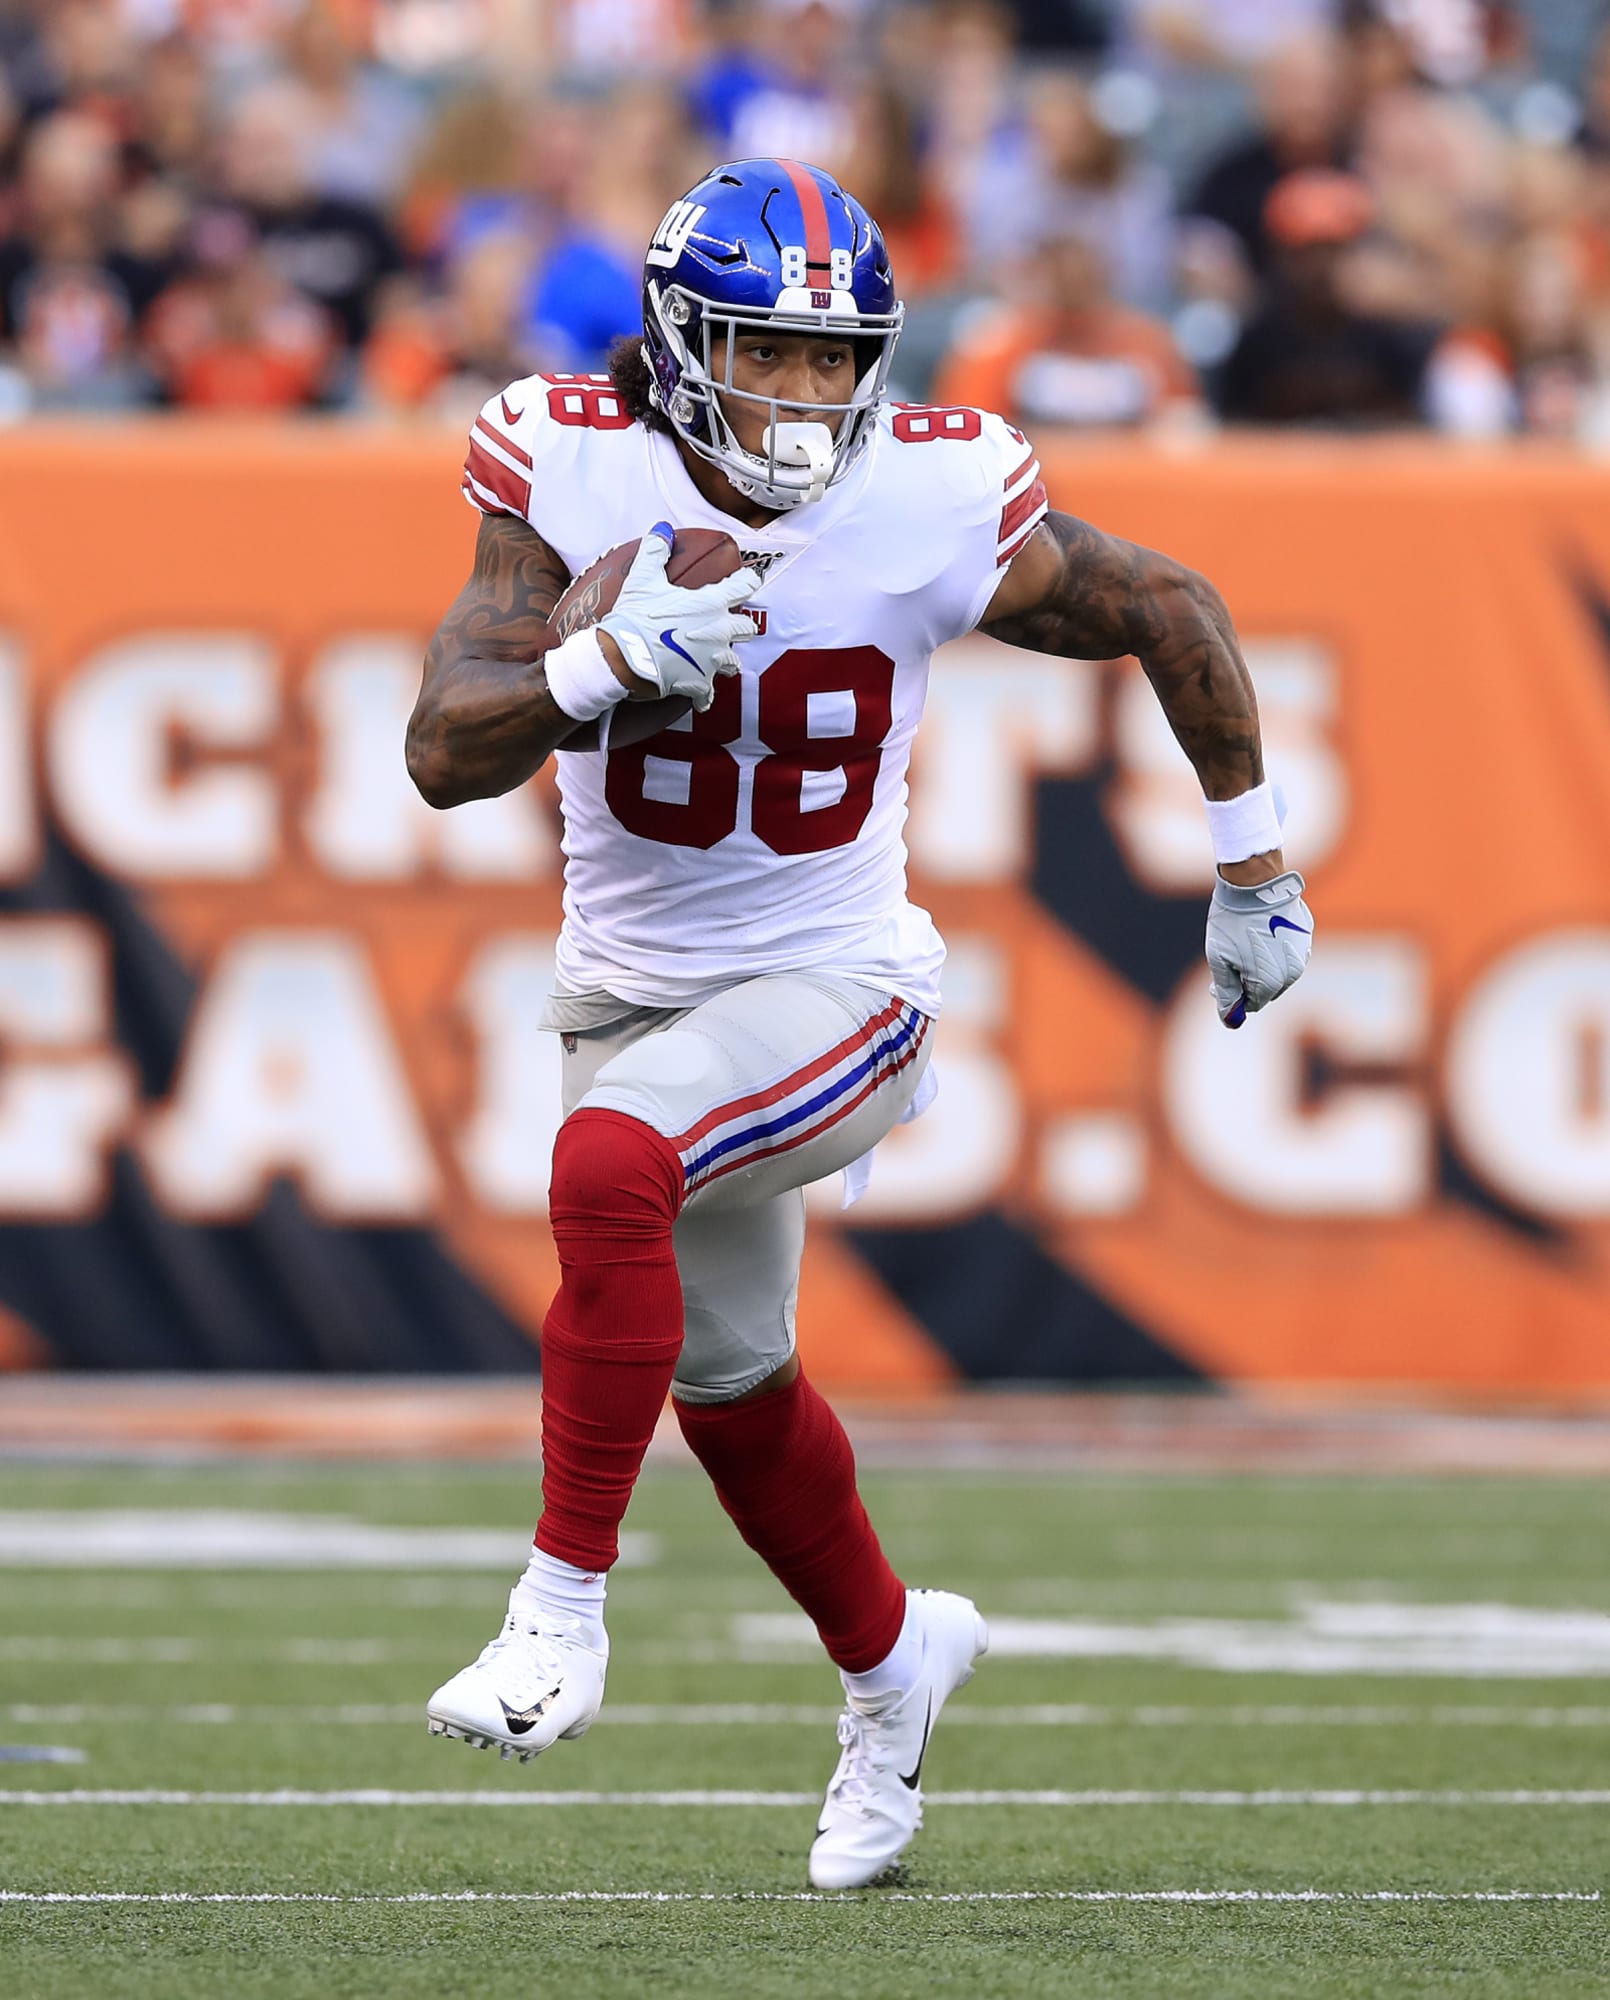 Evan Engram would be the perfect trade target for the Steelers